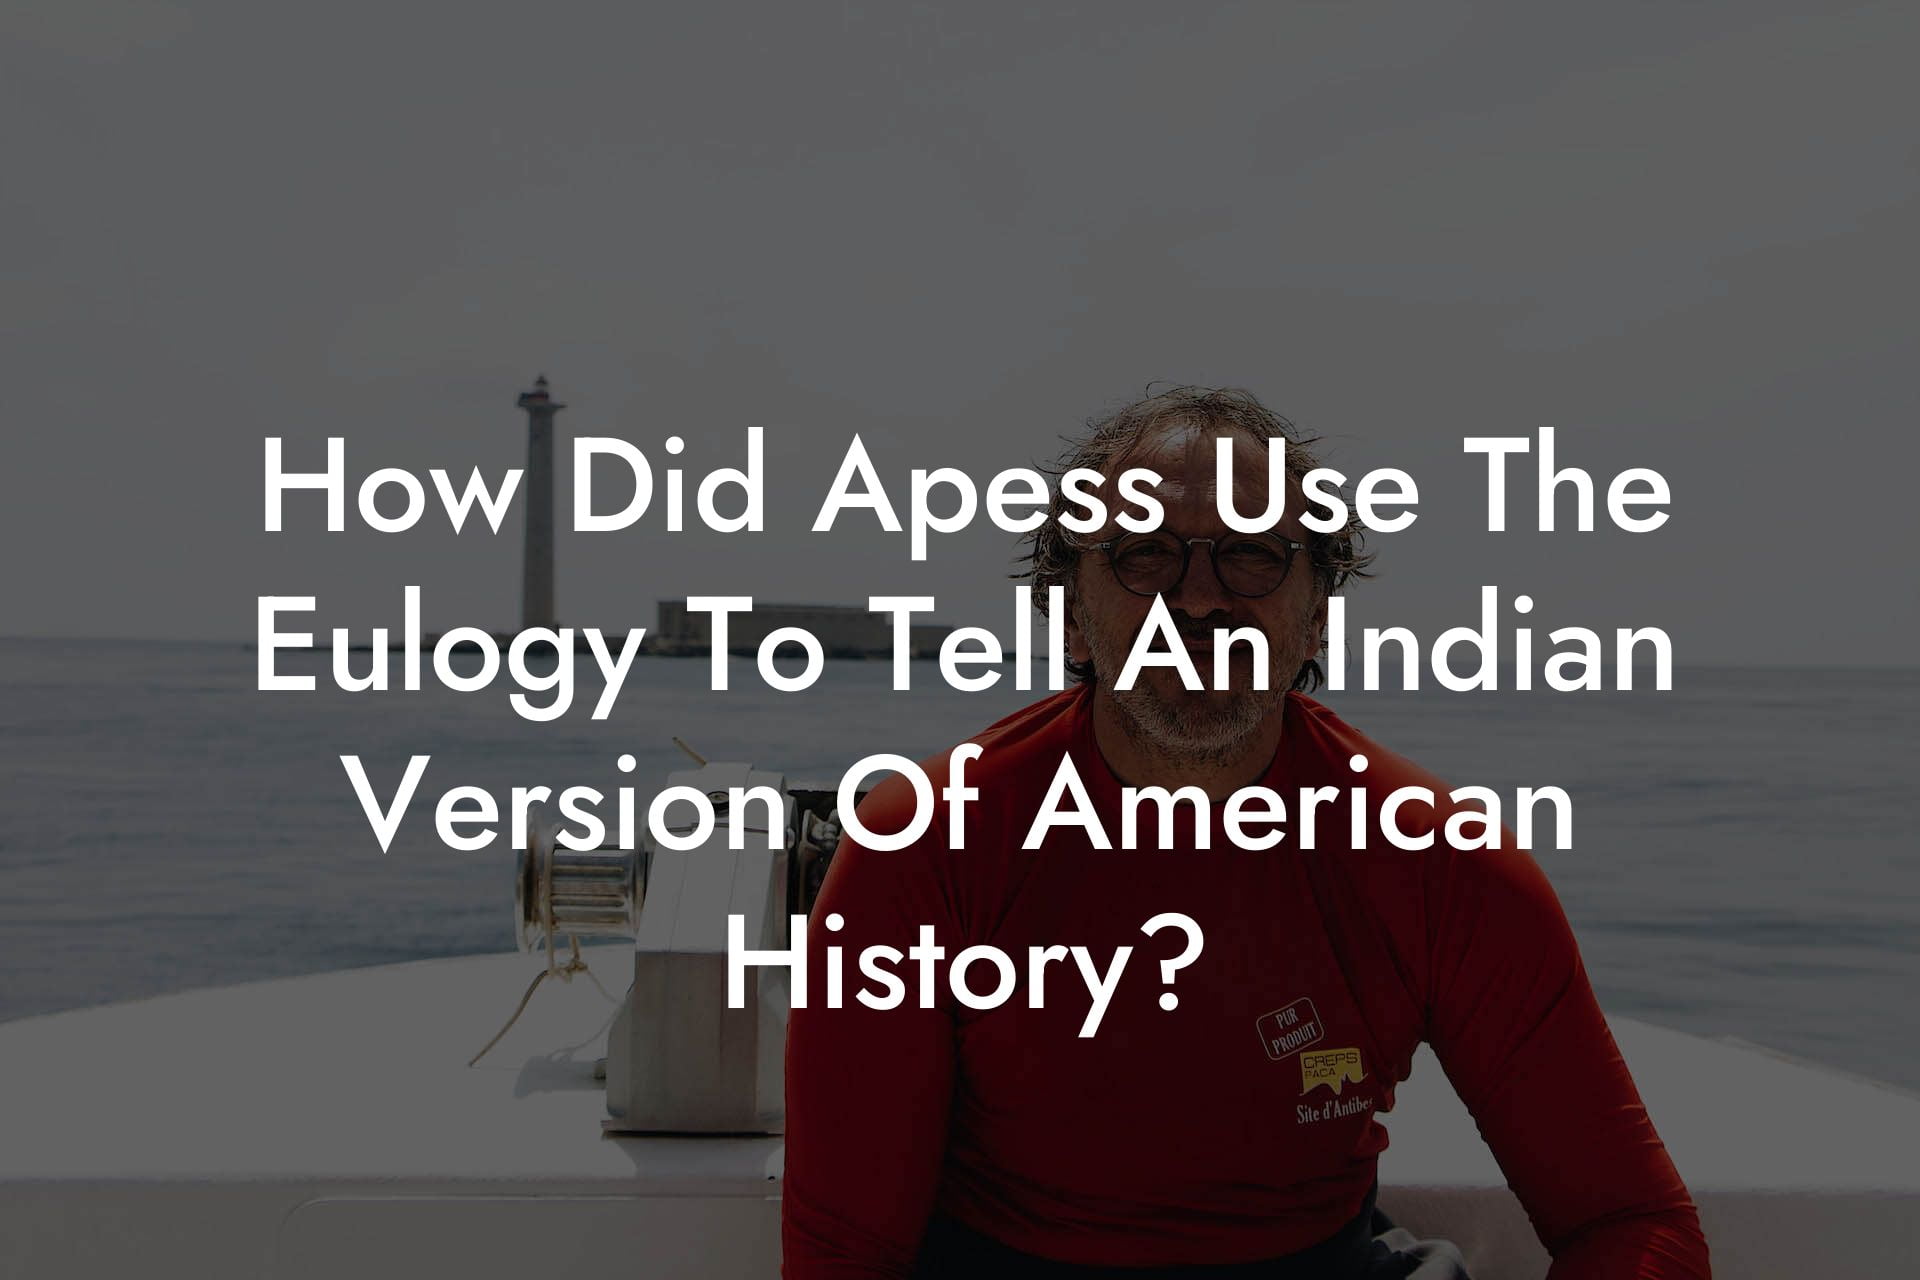 How Did Apess Use The Eulogy To Tell An Indian Version Of American History?